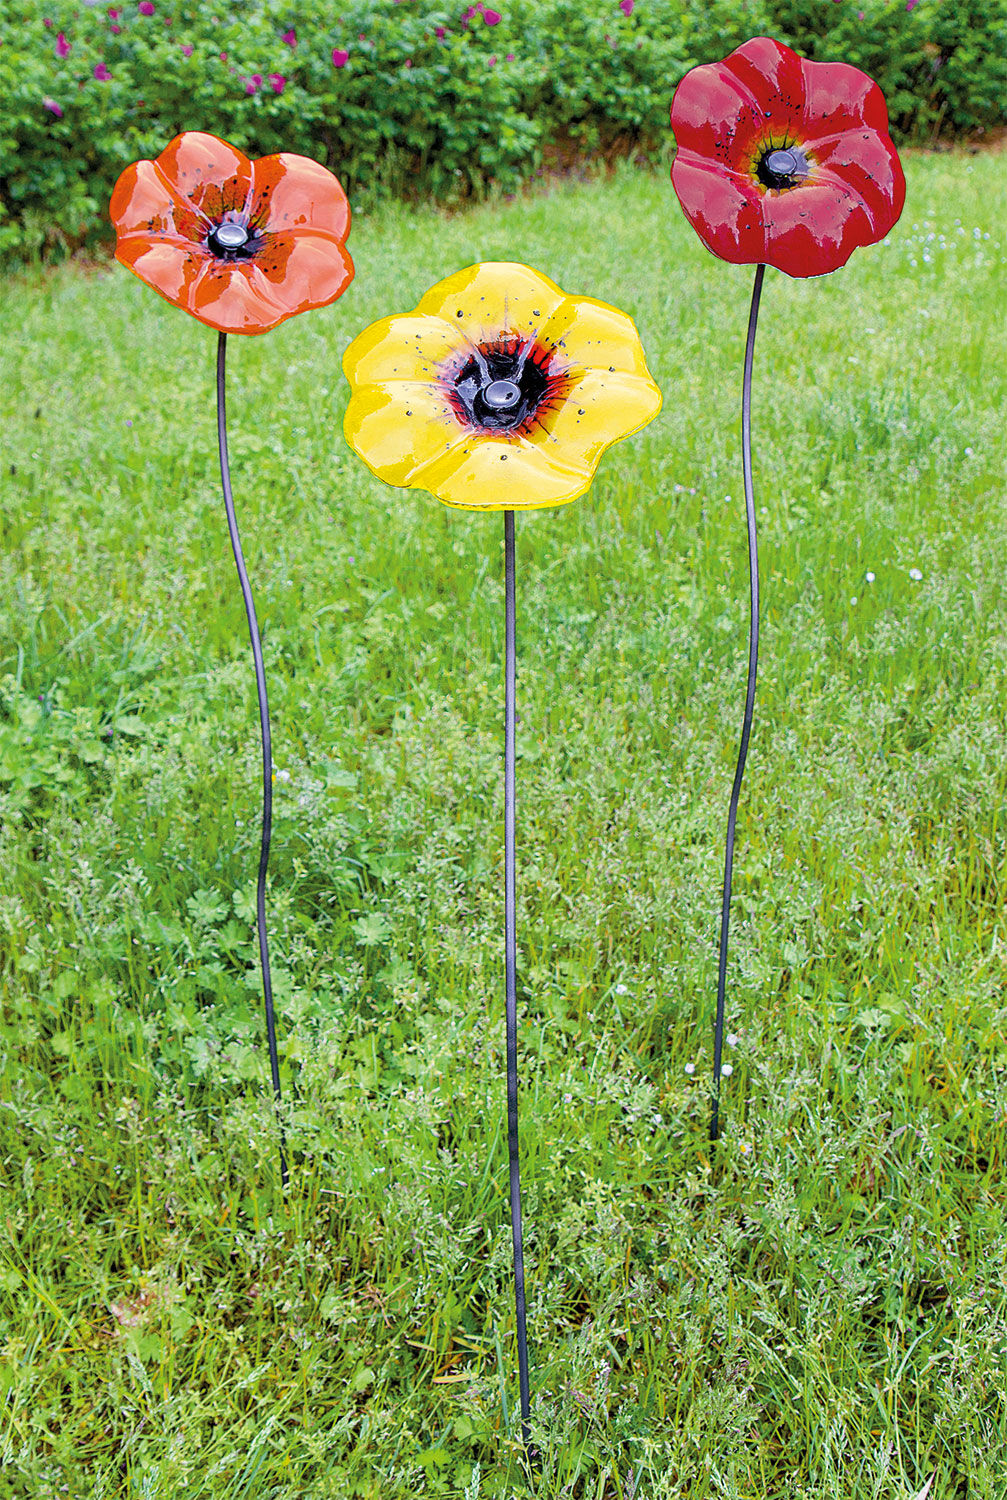 Garden stake flower set "Blossoms Red, Yellow and Orange", 3-pcs.